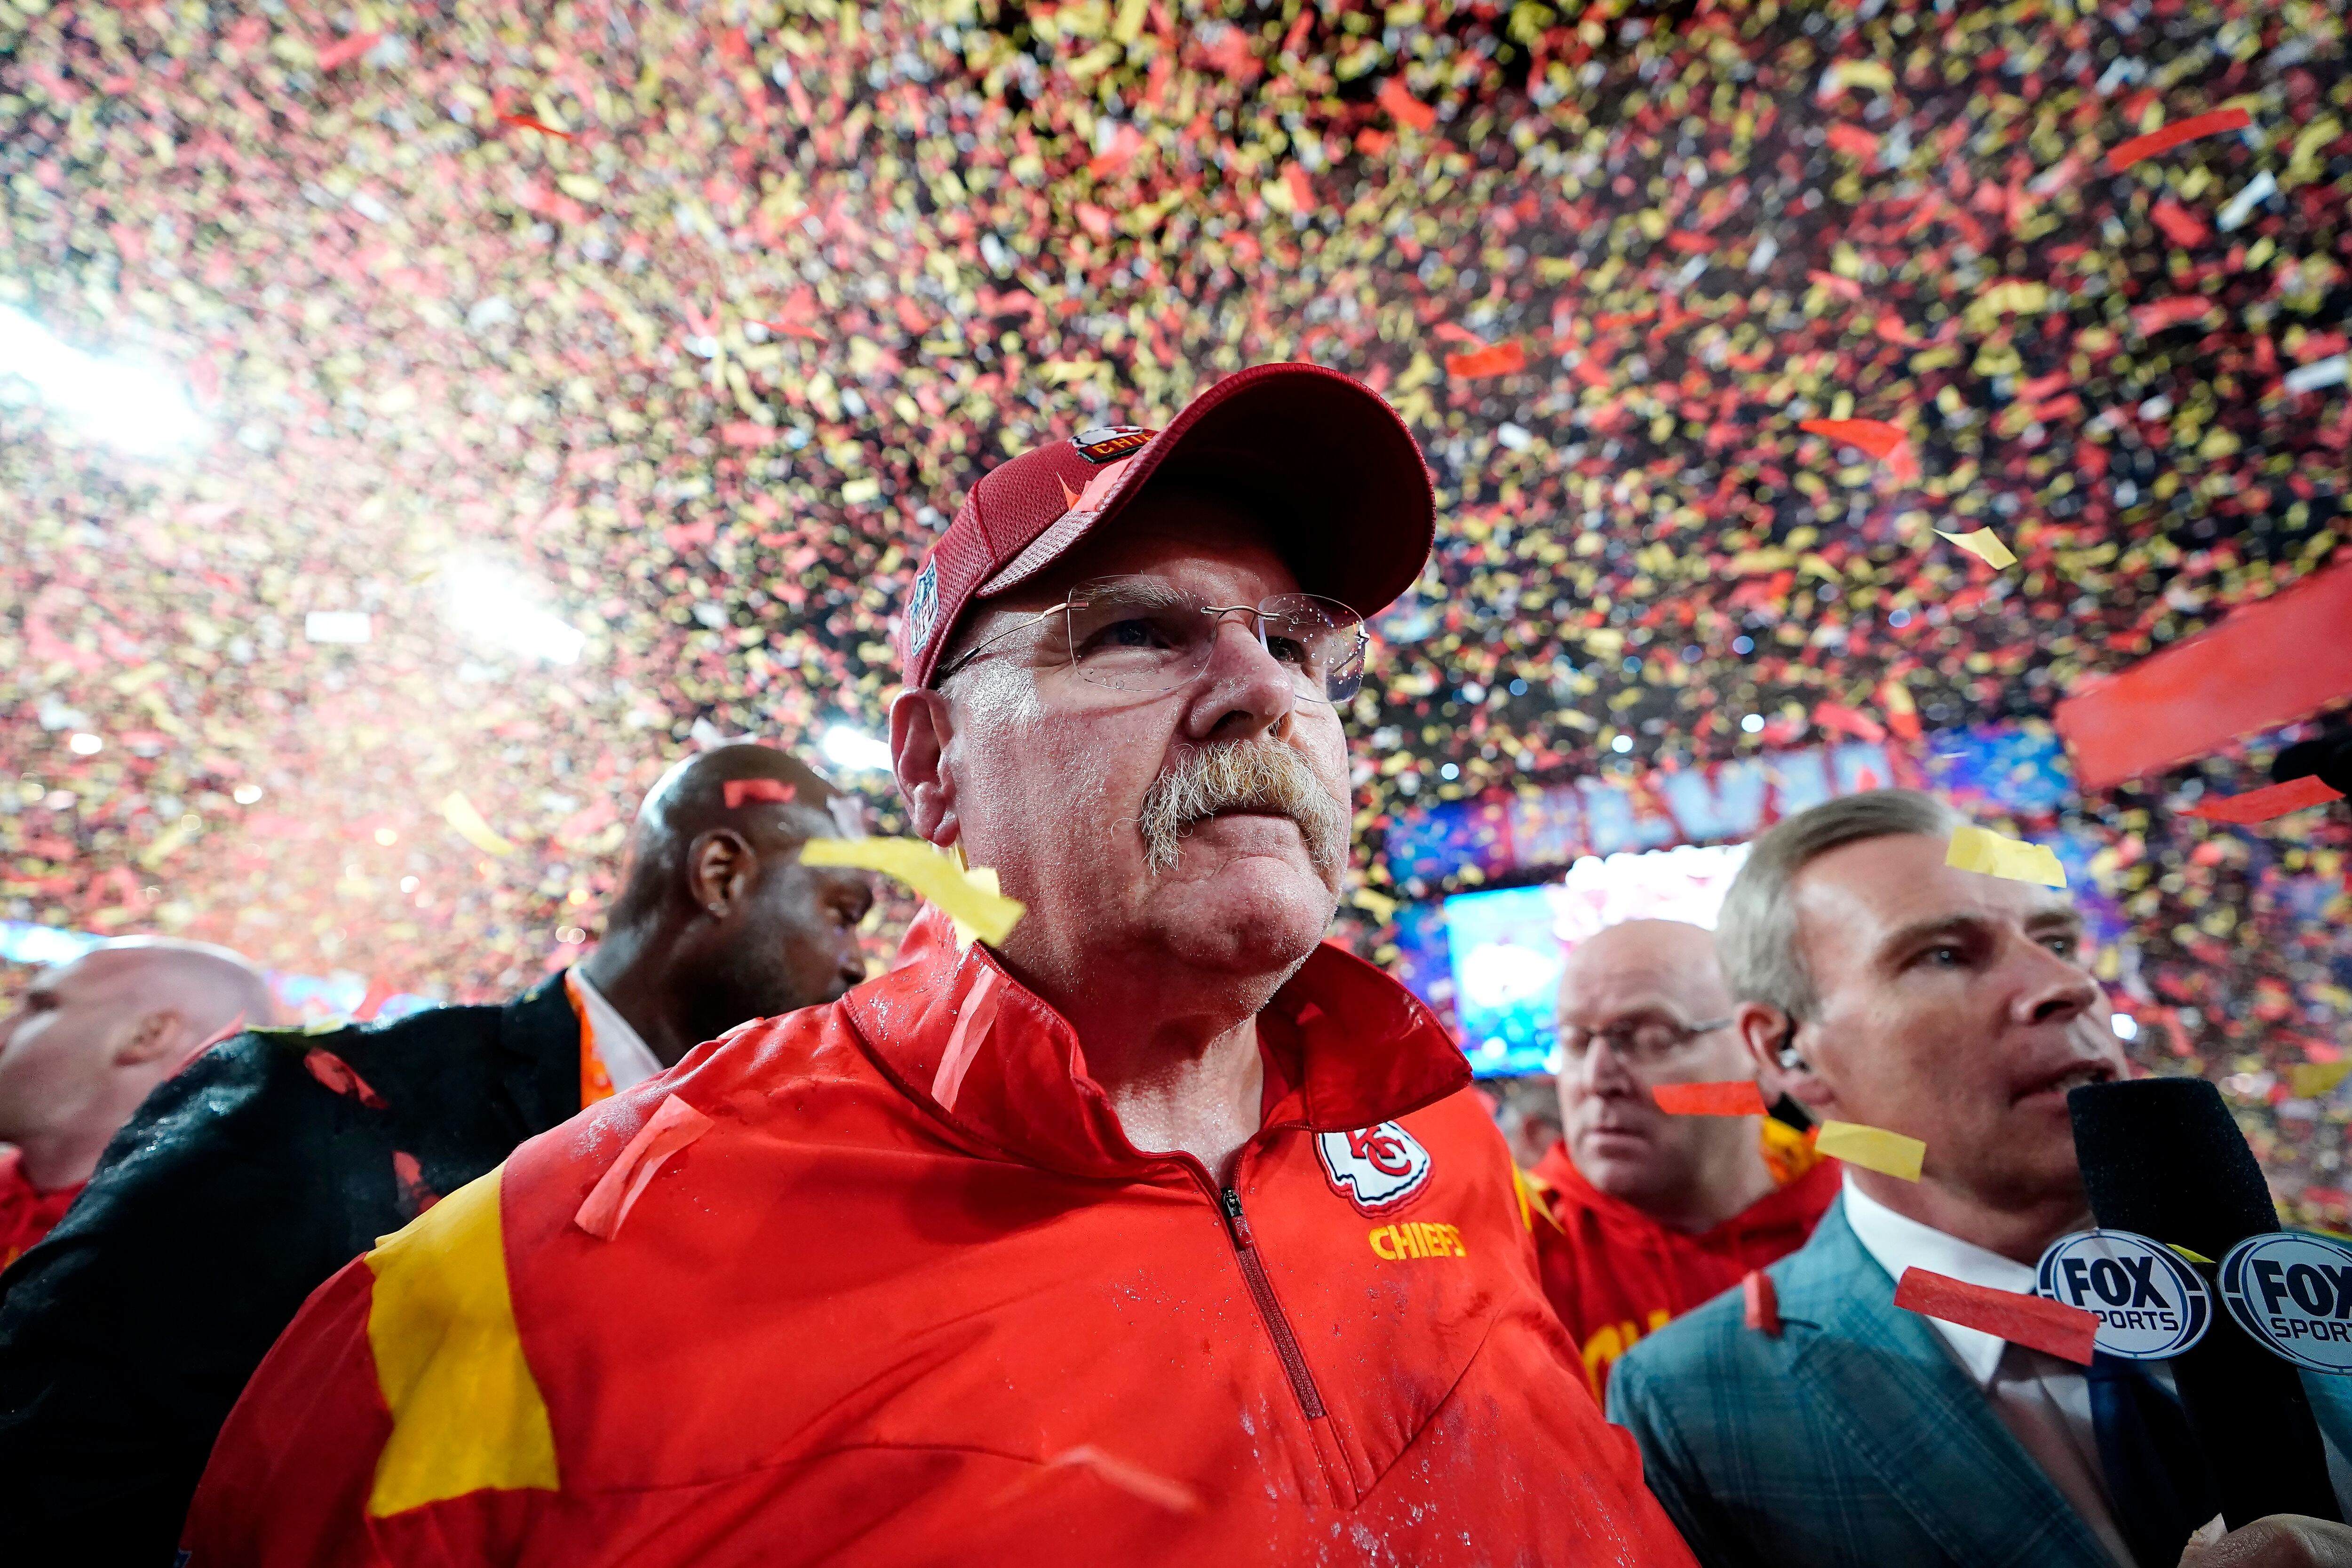 Kansas City Chiefs head coach Andy Reid is interviewed after the NFL Super Bowl 57 football game against the Philadelphia Eagles, Sunday, Feb. 12, 2023, in Glendale, Ariz. The Kansas City Chiefs defeated the Philadelphia Eagles 38-35. (AP Photo/Brynn Anderson)